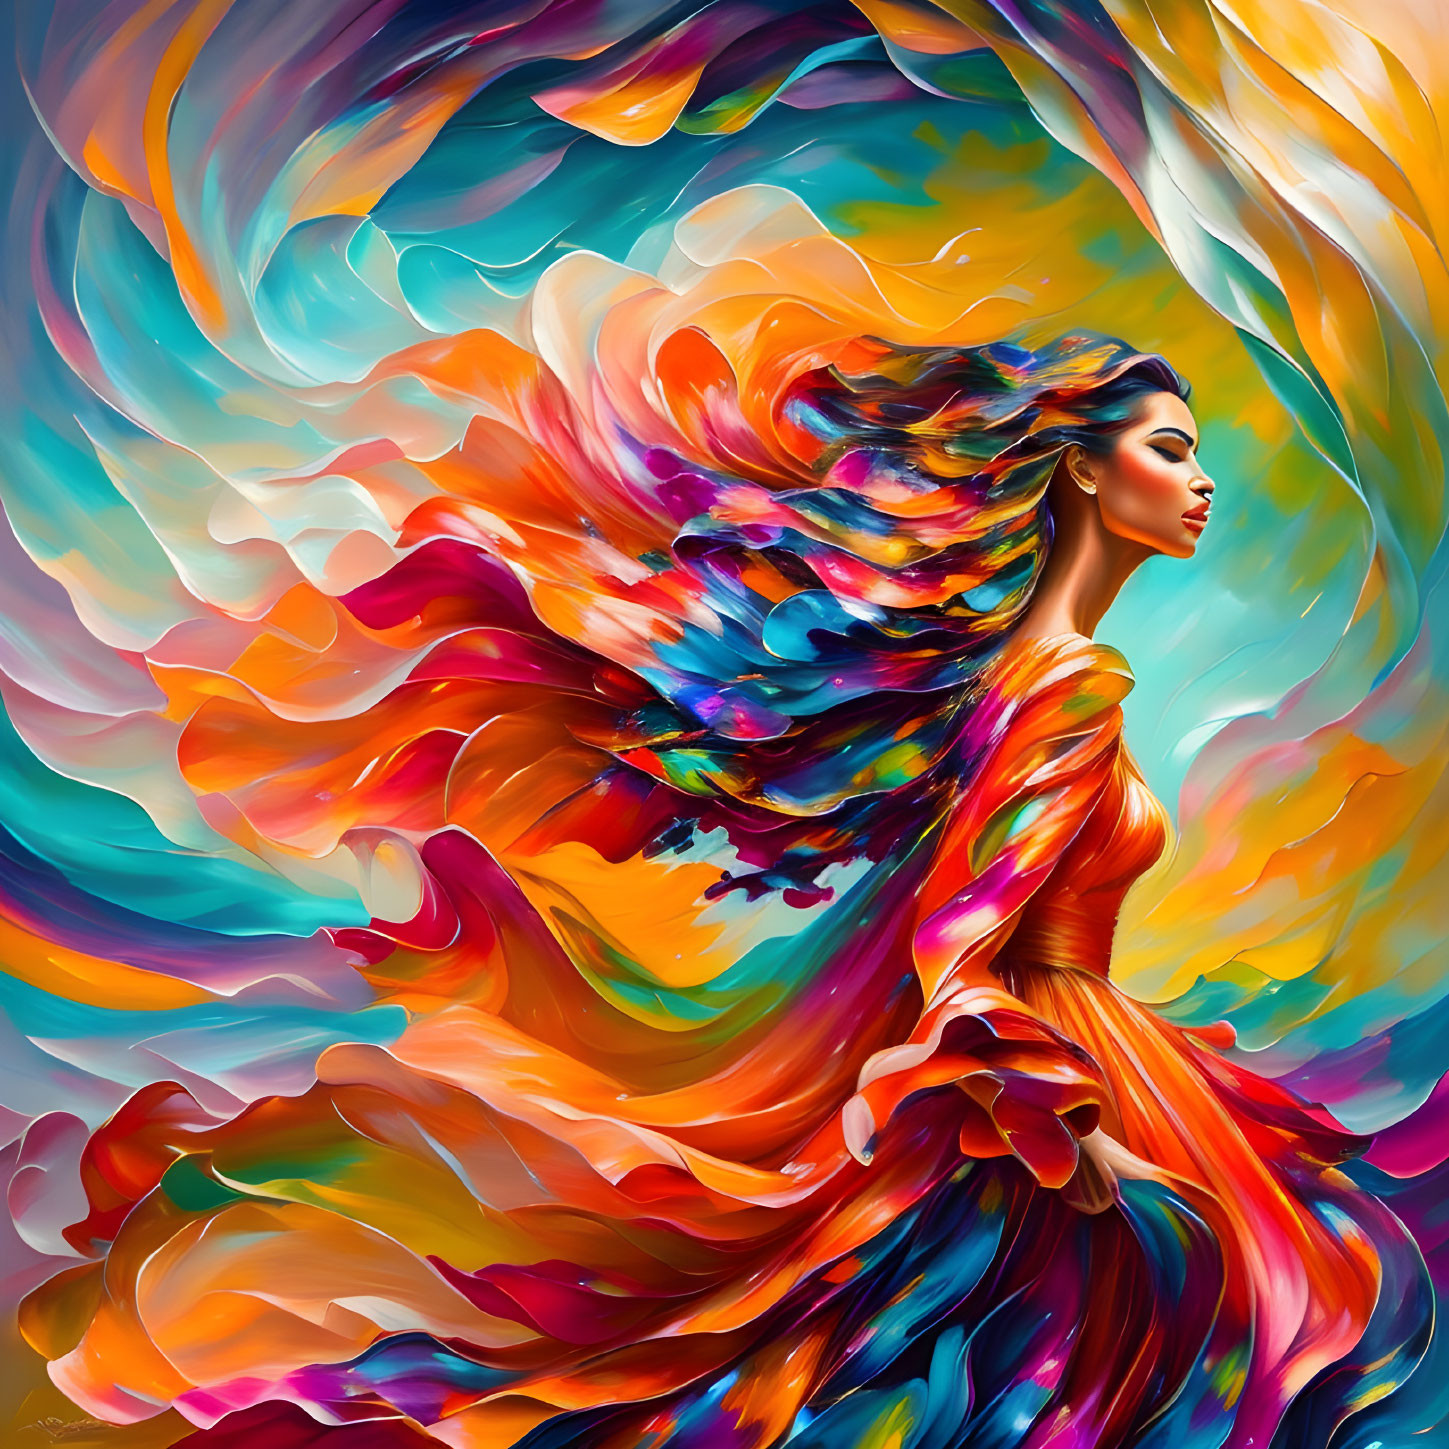 Colorful digital artwork: Woman with flowing hair and dress in abstract swirl